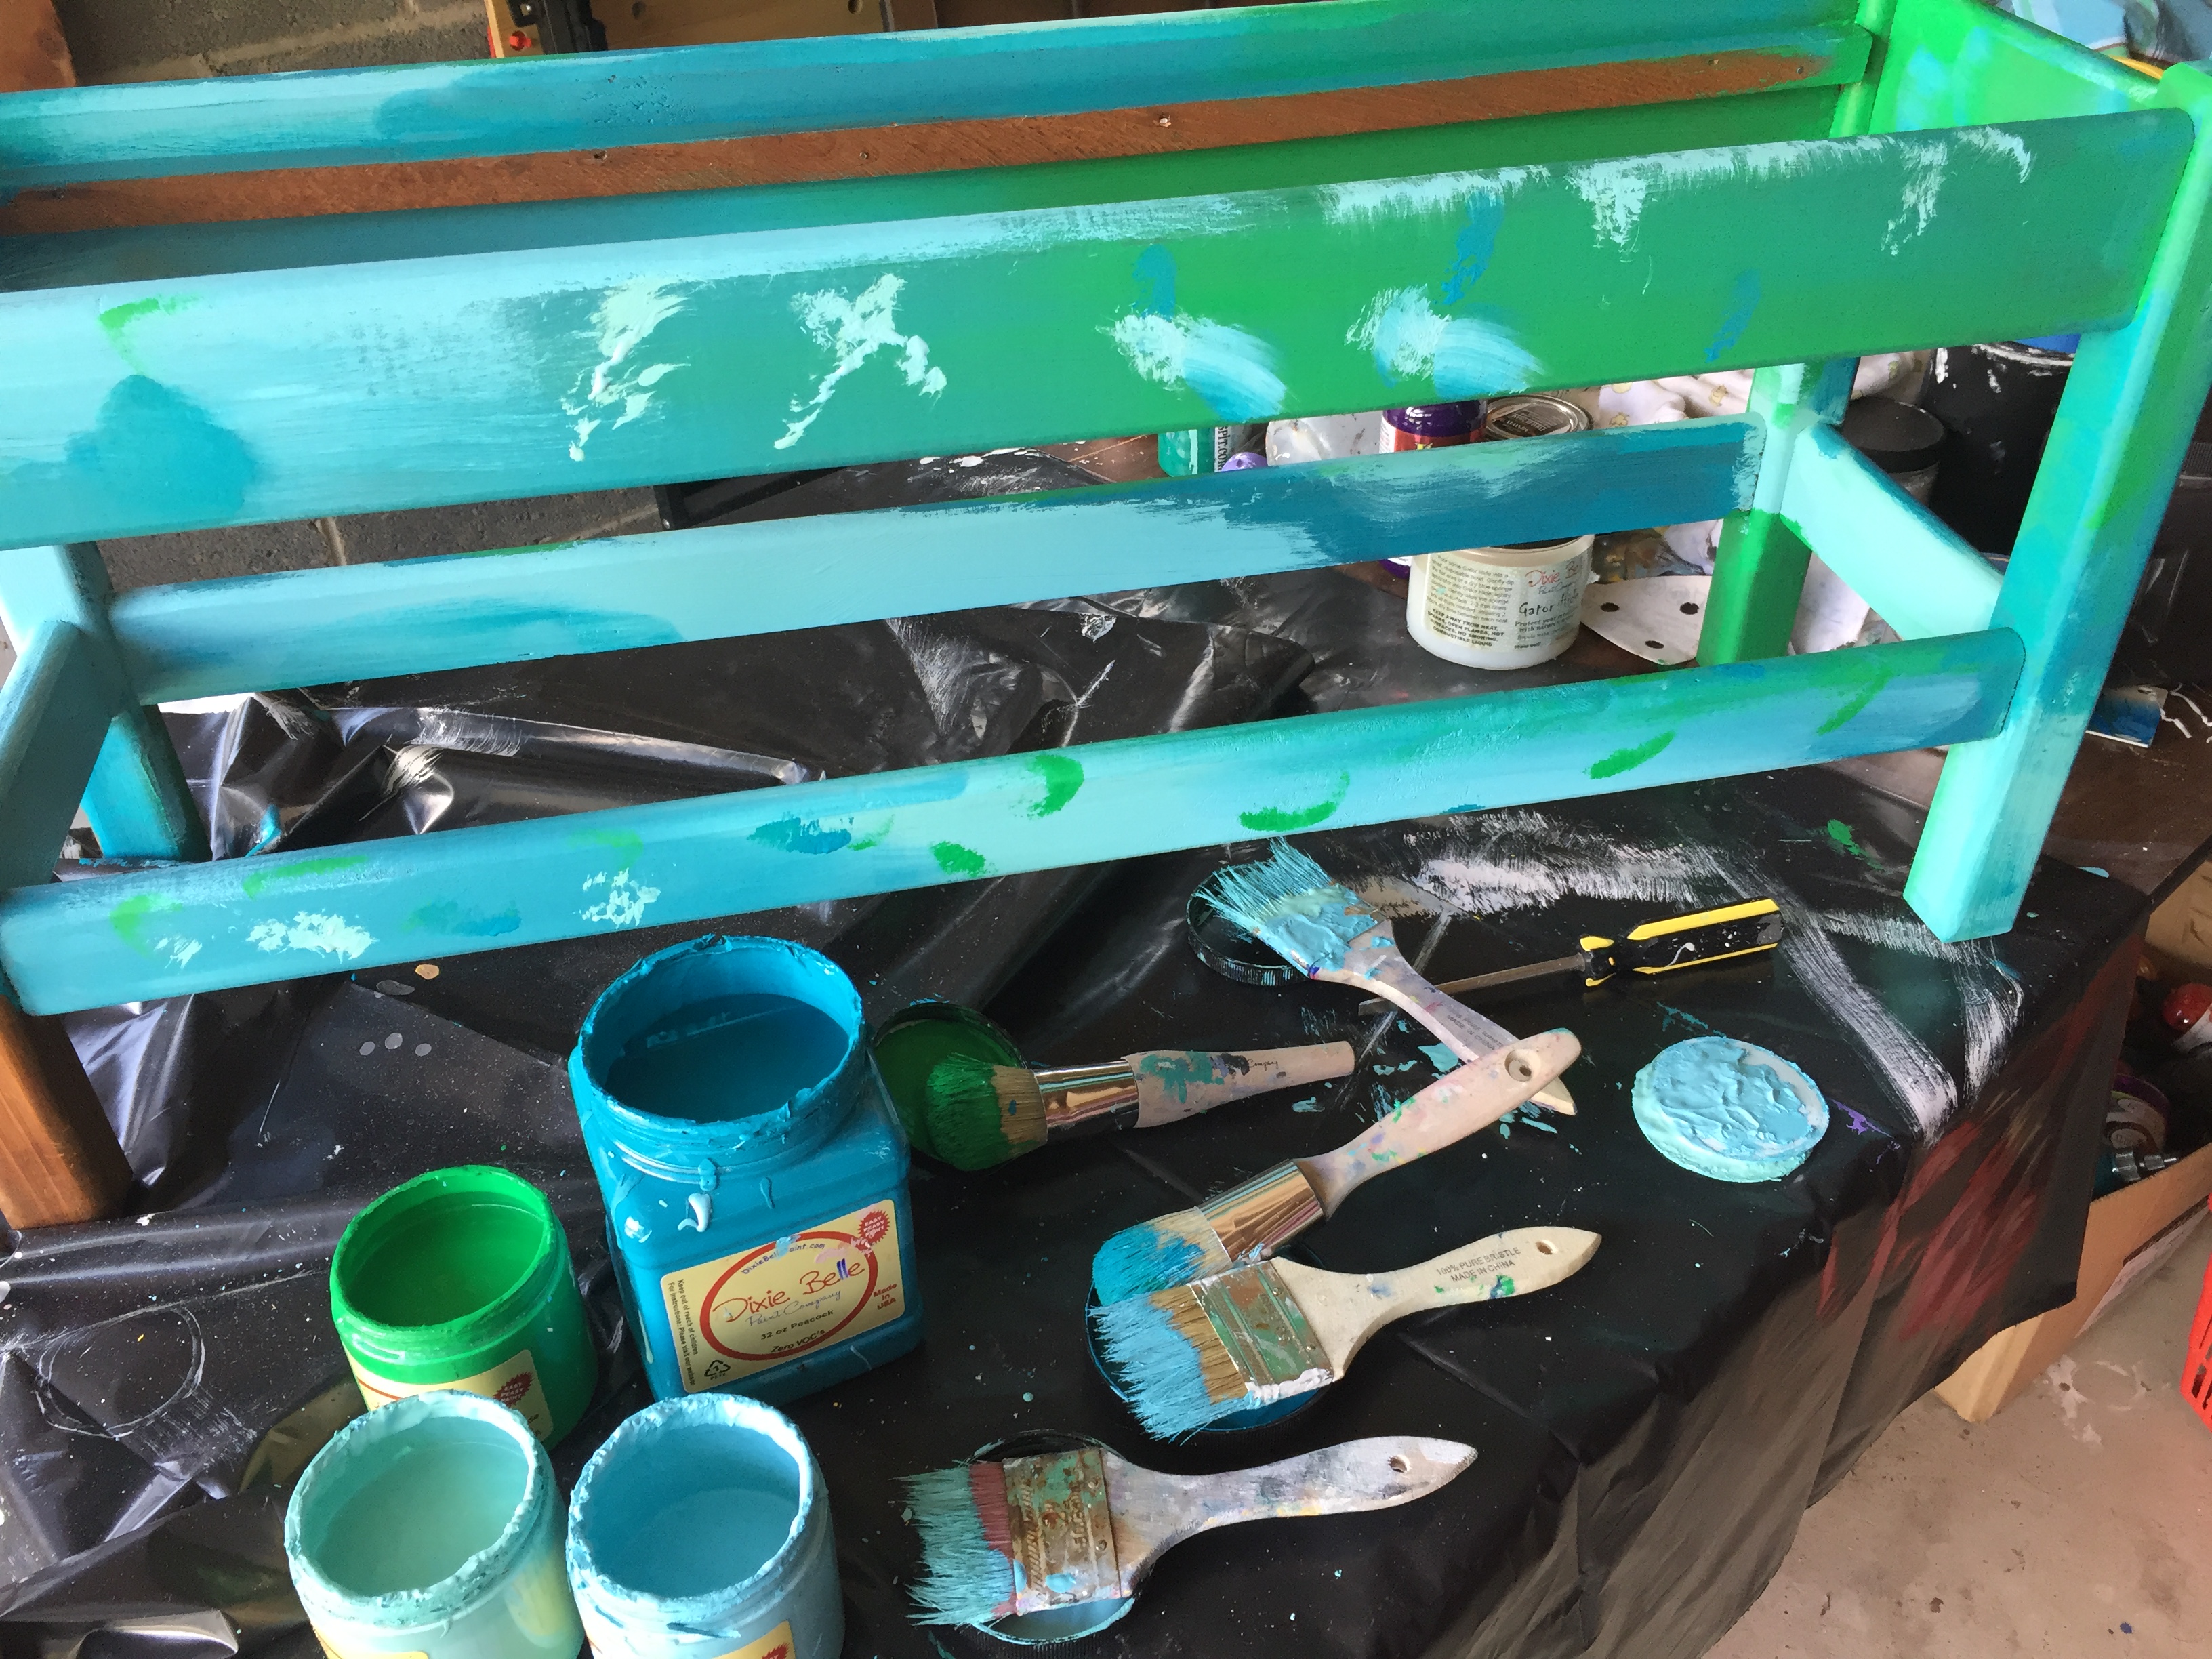 Courtney paints the bench several shades of blue as well as green